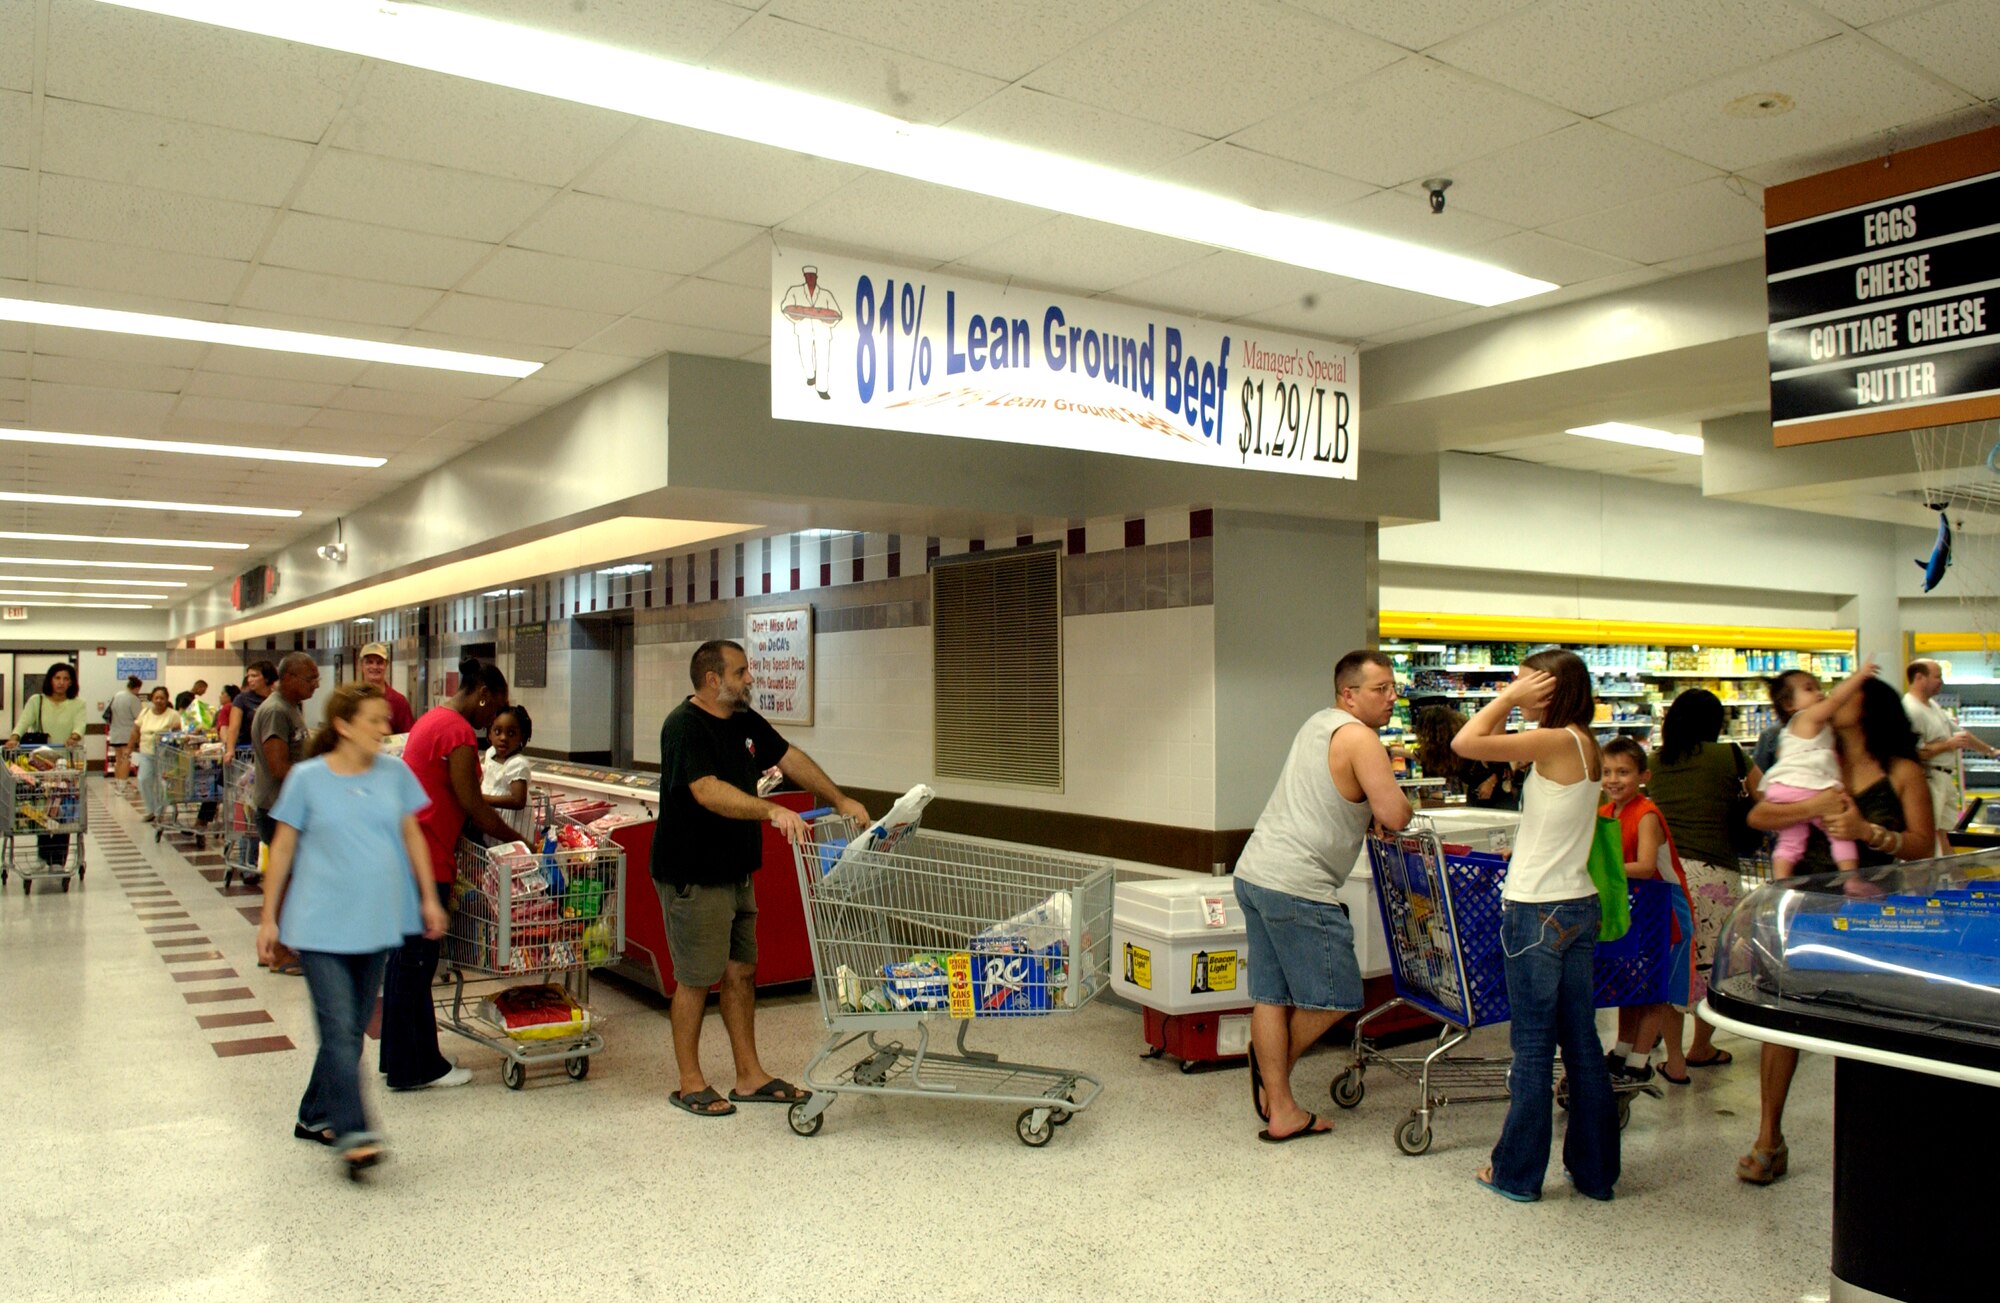 ANDERSEN AIR FORCE BASE, Guam - The commissary line stretches back to the frozen food section, April 1, 2007, in preparation for typhoon Kong-Ray.  The 36th Wing personnel take appropriate actions and make necessary provisions in preparation for every typhoon that has the potential strike Andersen. (Air Force photo by Senior Airman Miranda Moorer)